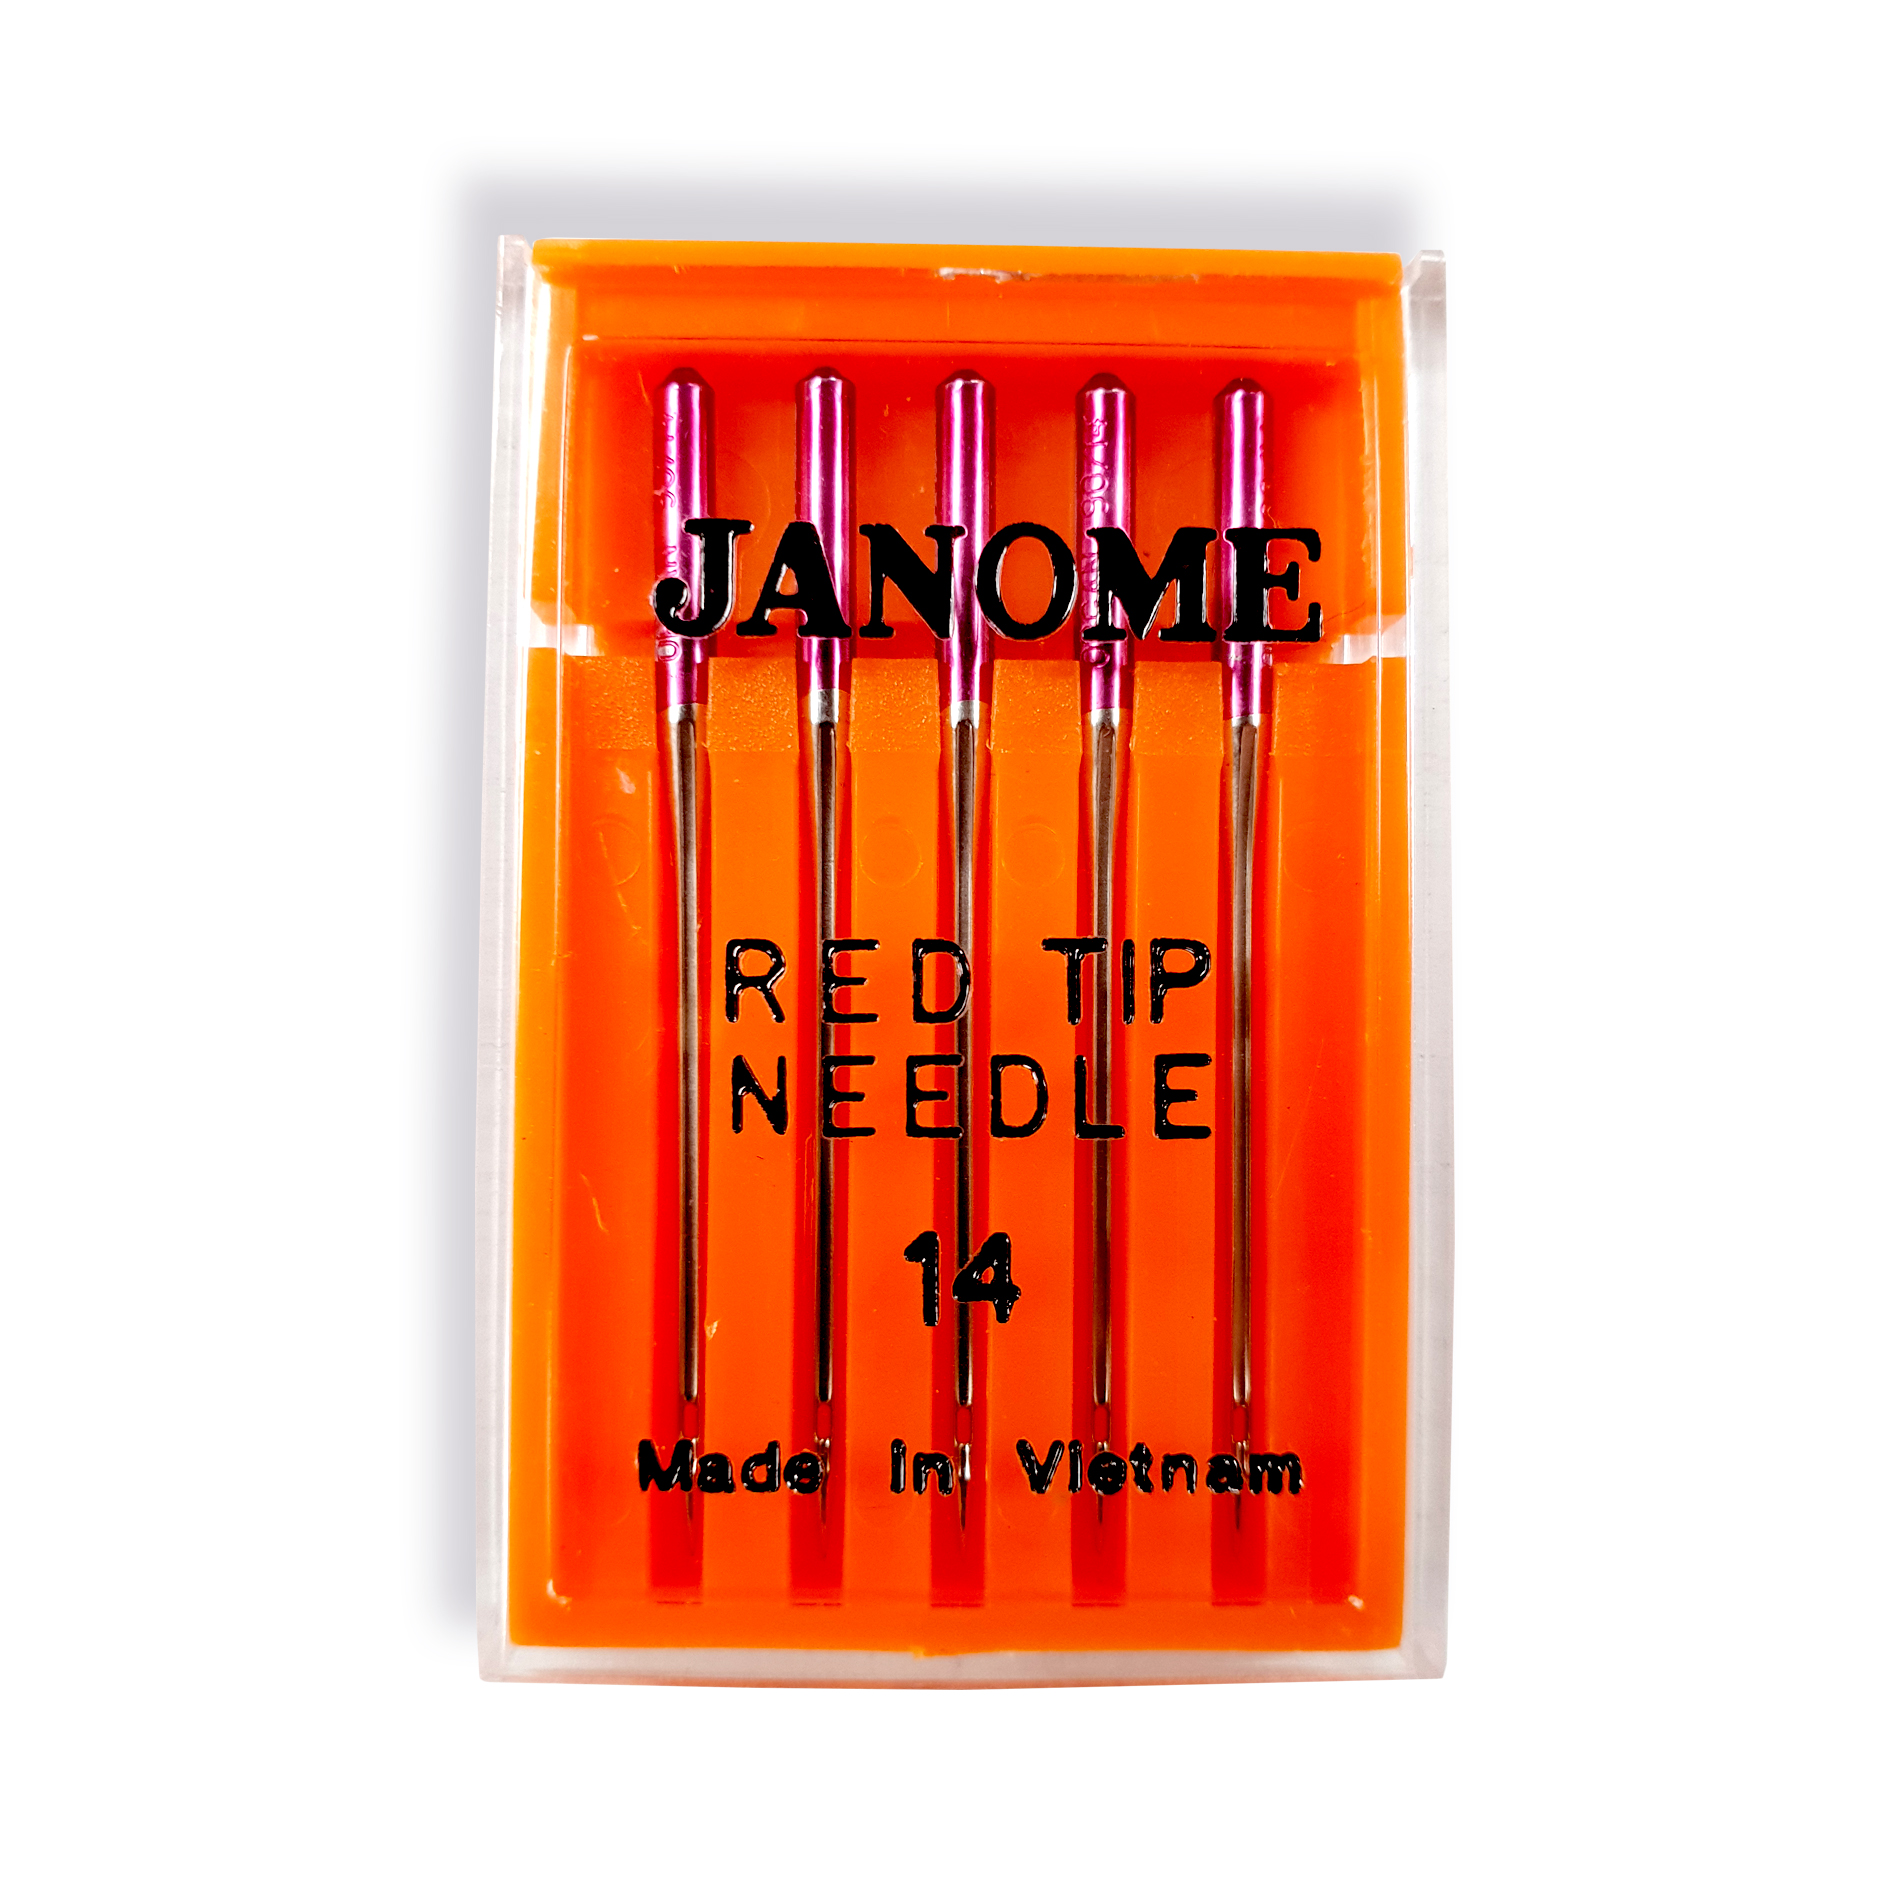 Janome Leather Sewing Machine Needles - Janome Sewing Centre Everton Park